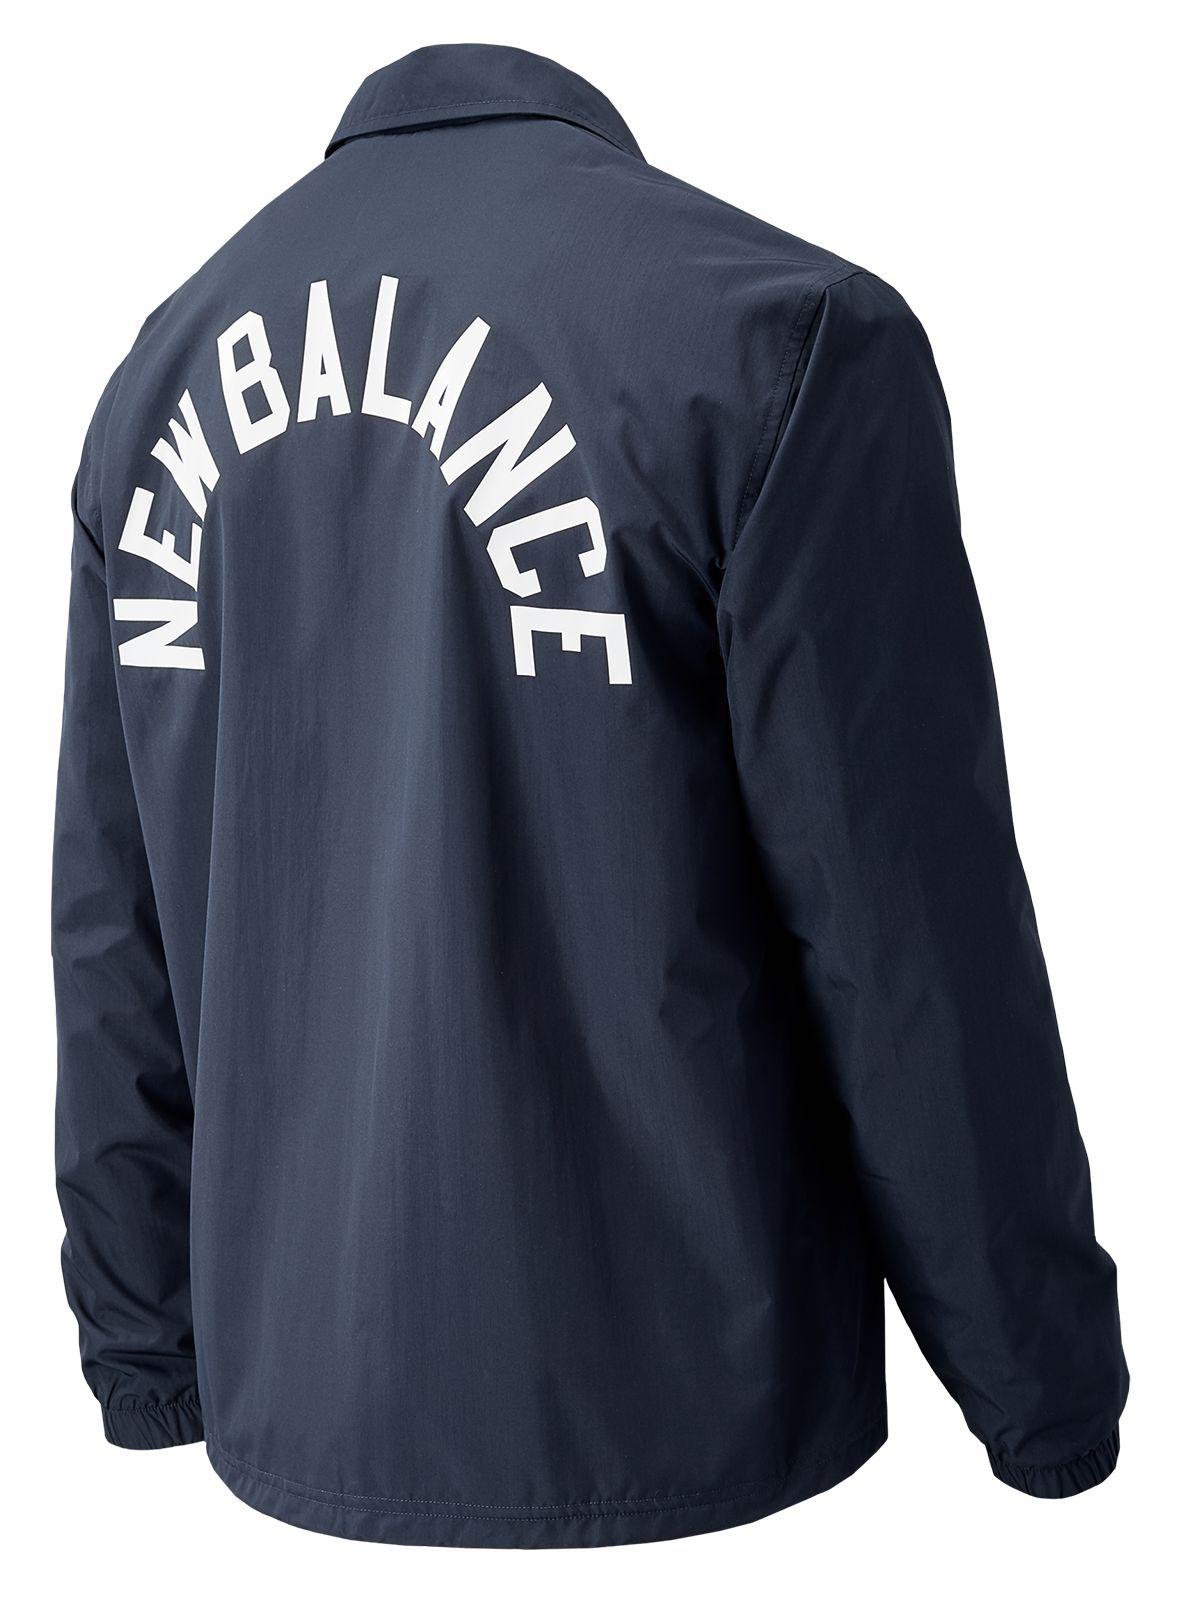 New Balance Synthetic Classic Coaches Jacket in Navy (Blue) for Men - Lyst